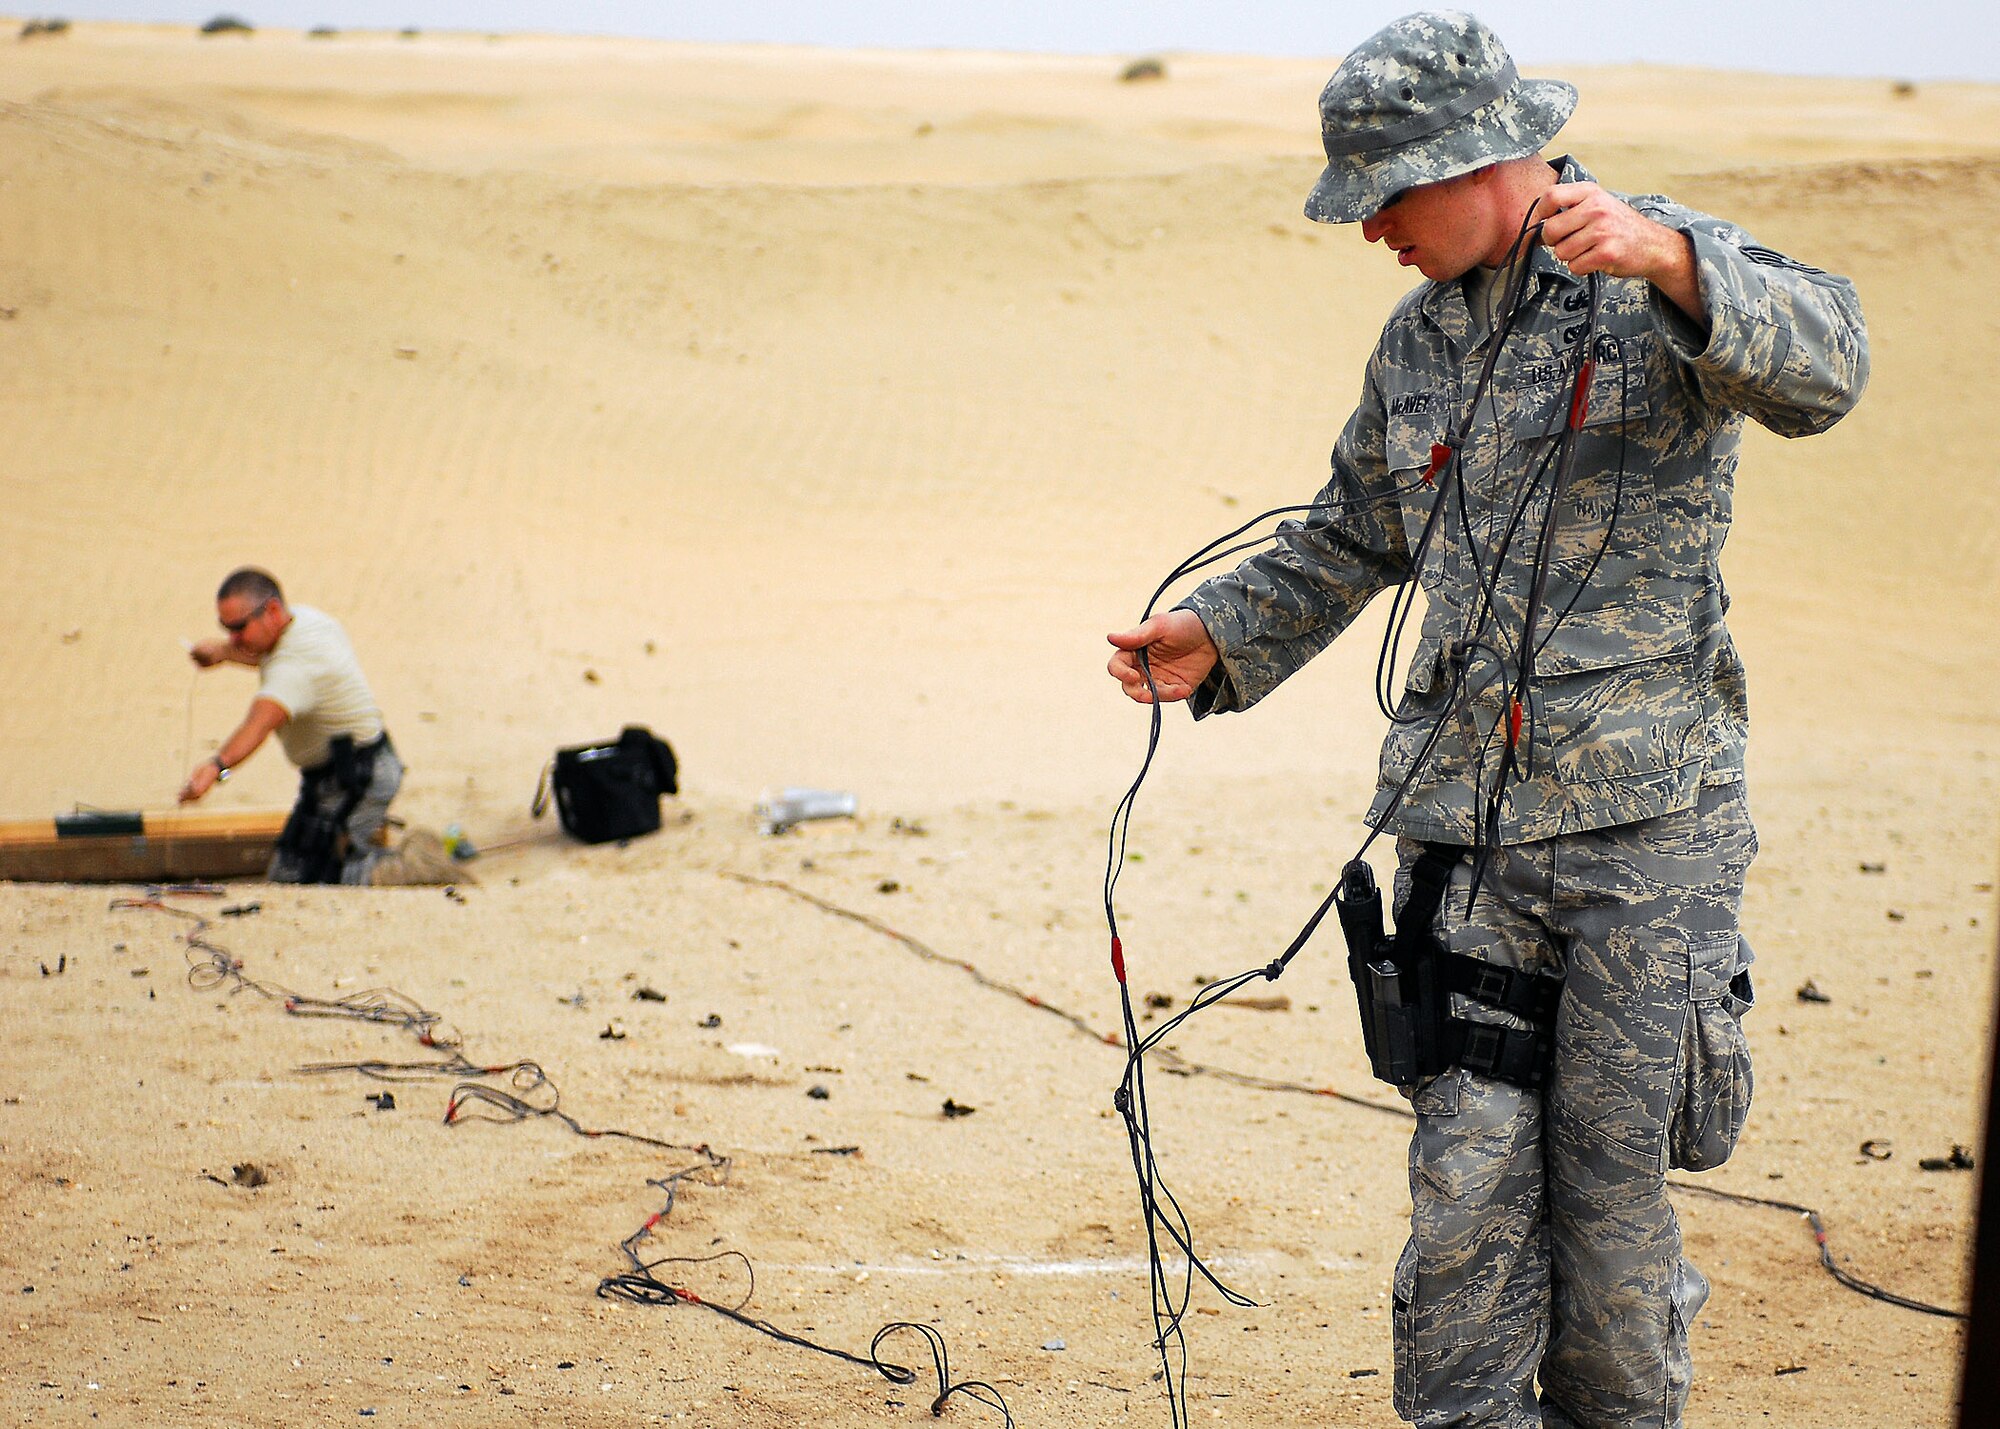 Staff Sgt. David Barrett (rear) and Staff Sgt. Brenden McAvey, 386th Expeditionary Civil Engineering Explosive Ordnance Disposal Flight members, work to set up a detonation site outside the wire at an air base in Southwest Asia. Airmen in the 386th EOD flight have safely cleared almost 1,000 unexploded ordinance devices during their six-month deployment here. (U.S. Air Force photo/Capt. Suzanne VanderWeyst)